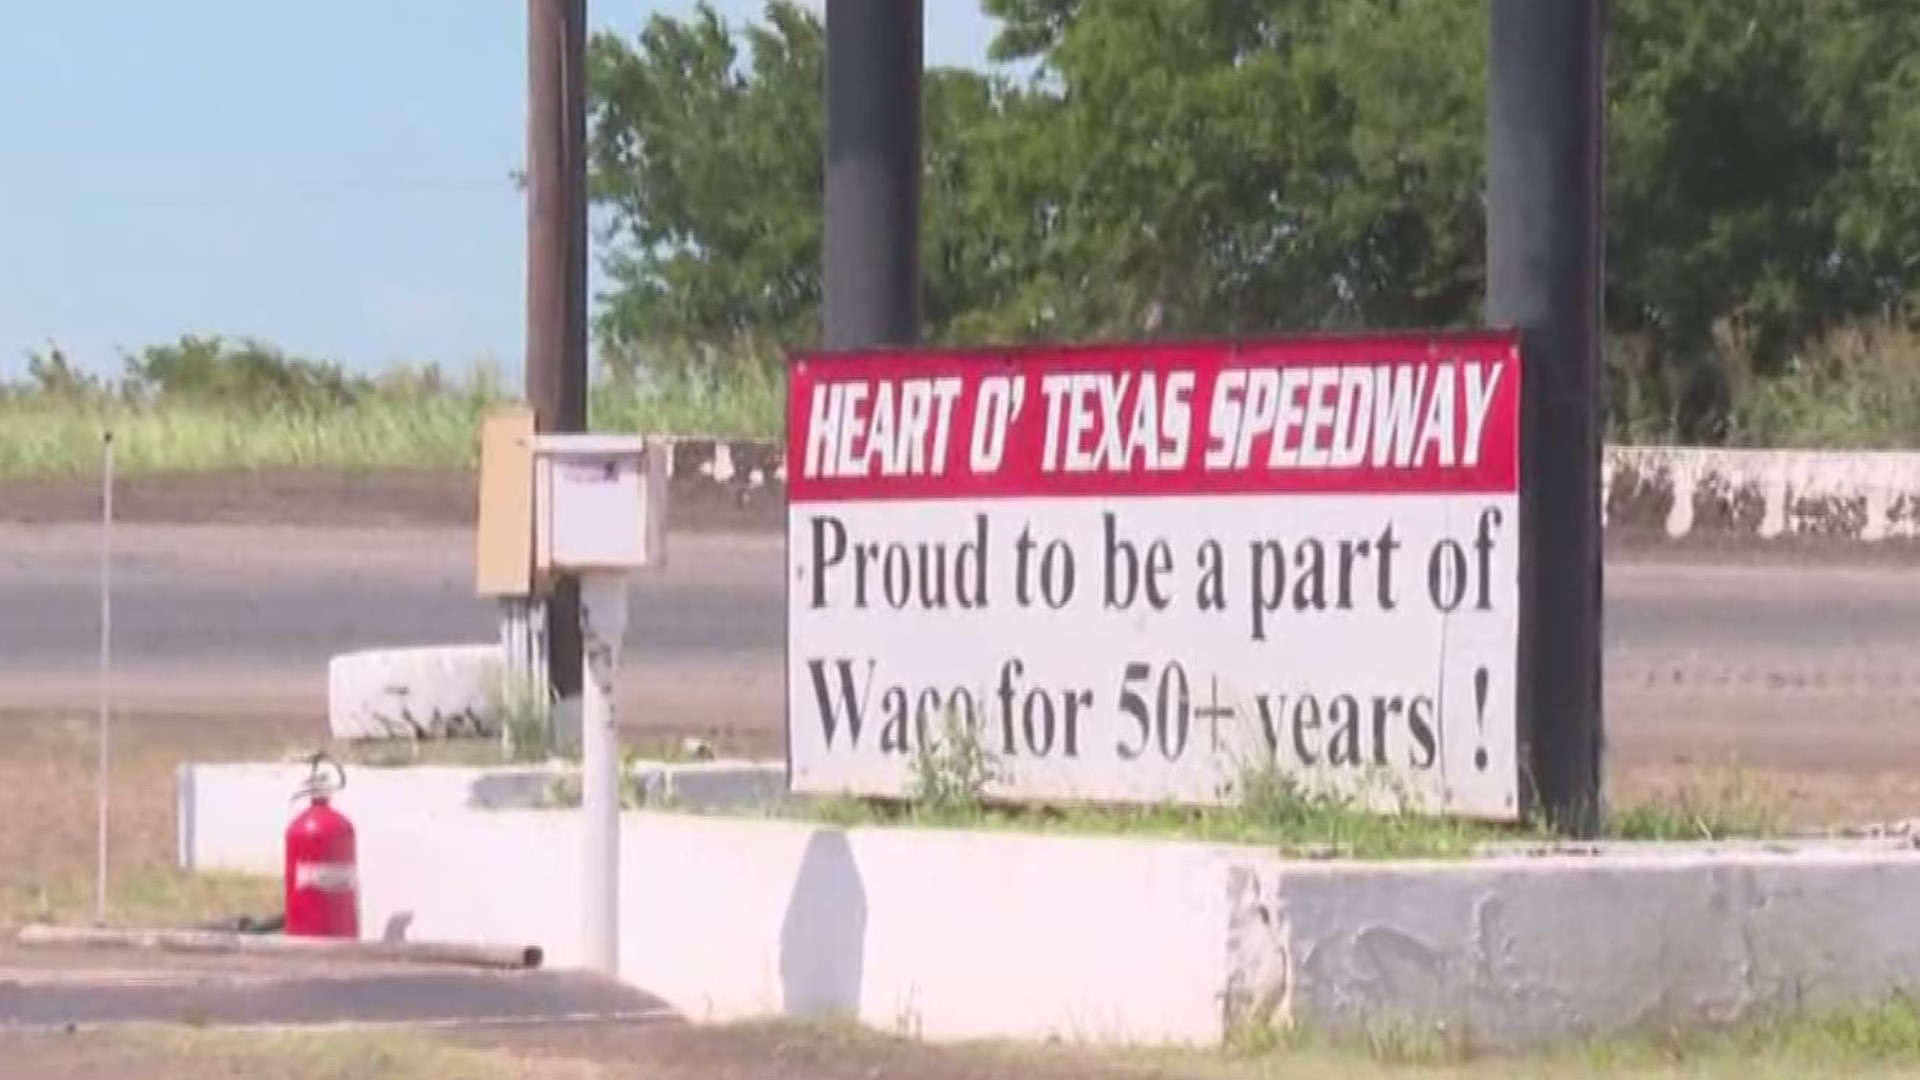 Three men are recovering after a crash at the Heart of Texas Speedway in Elm Mott.